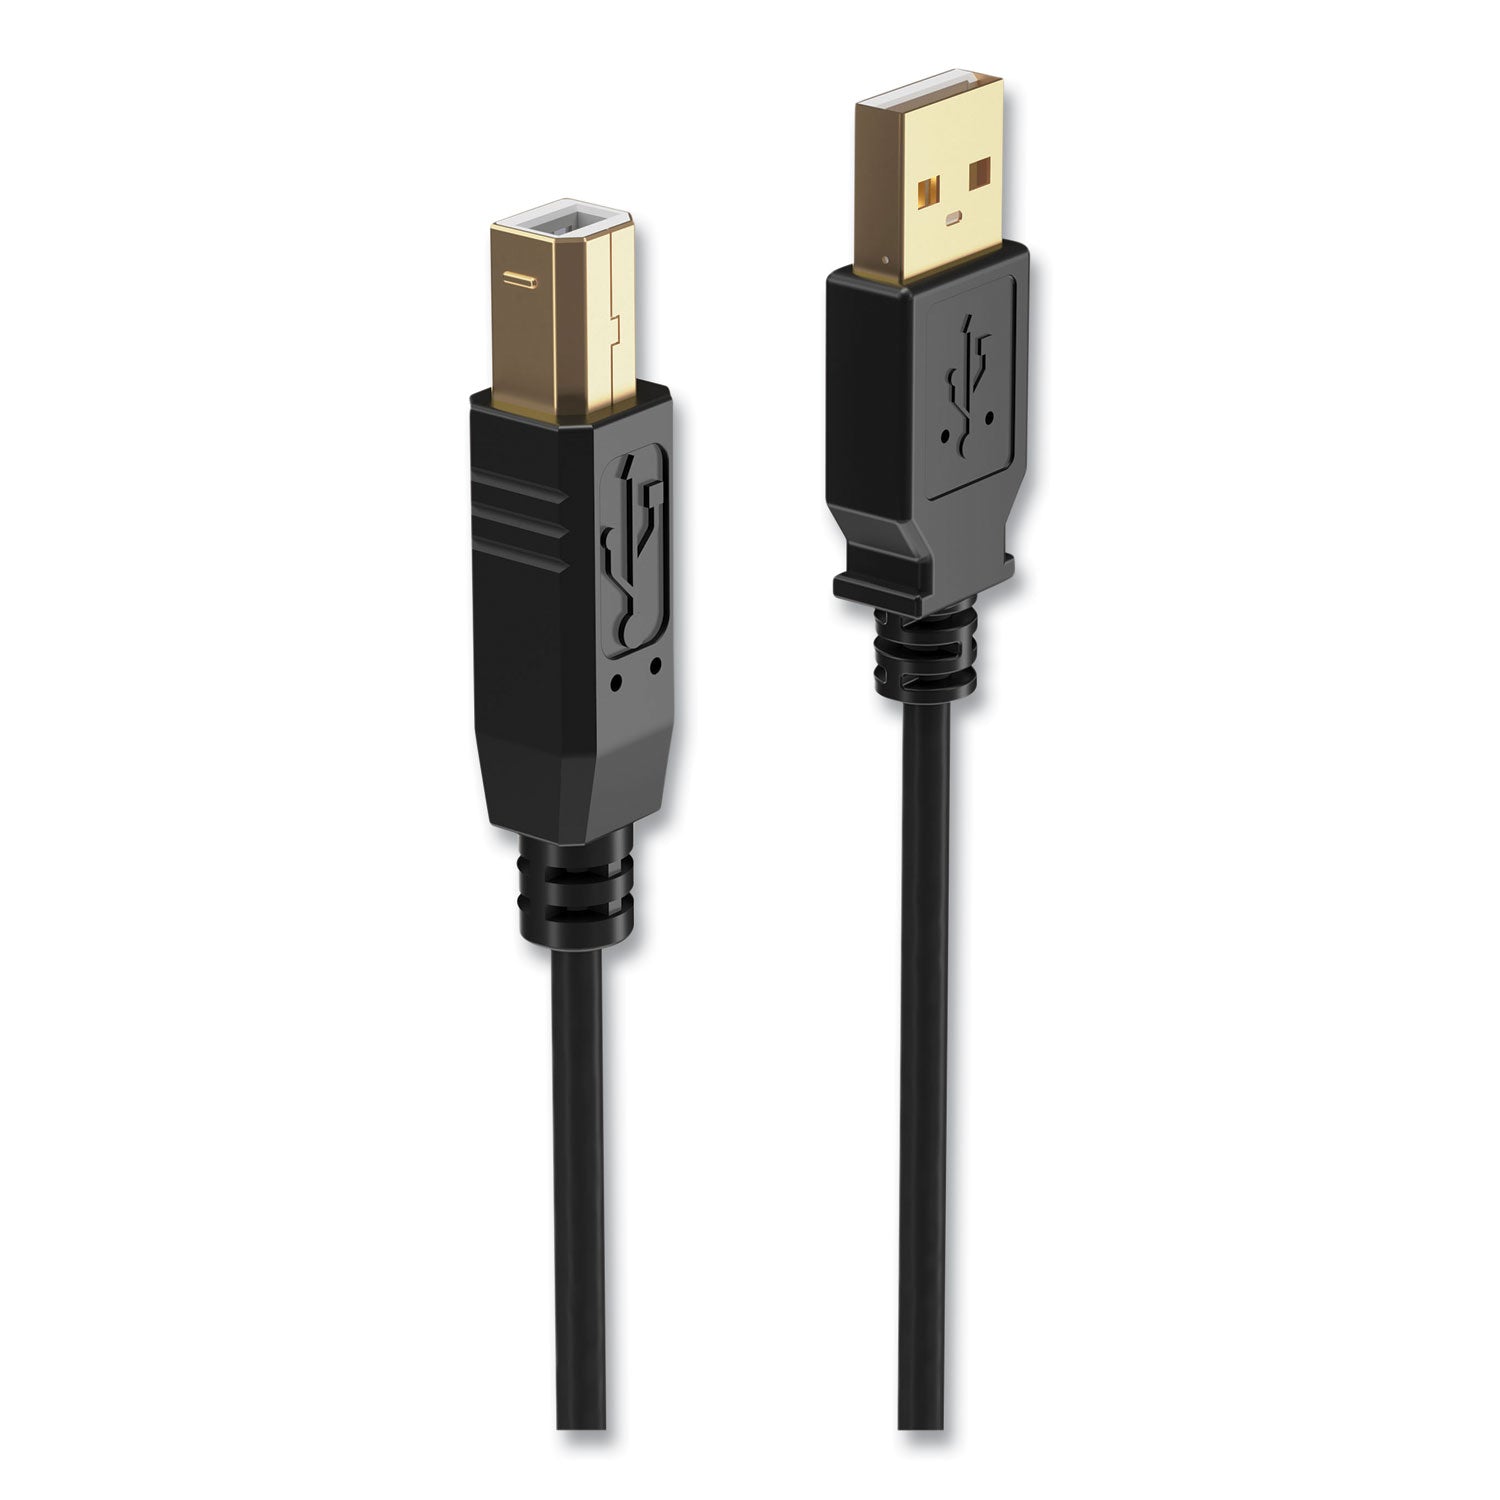 usb-printer-cable-gold-plated-connectors-16-ft-black_nxt24400026 - 2